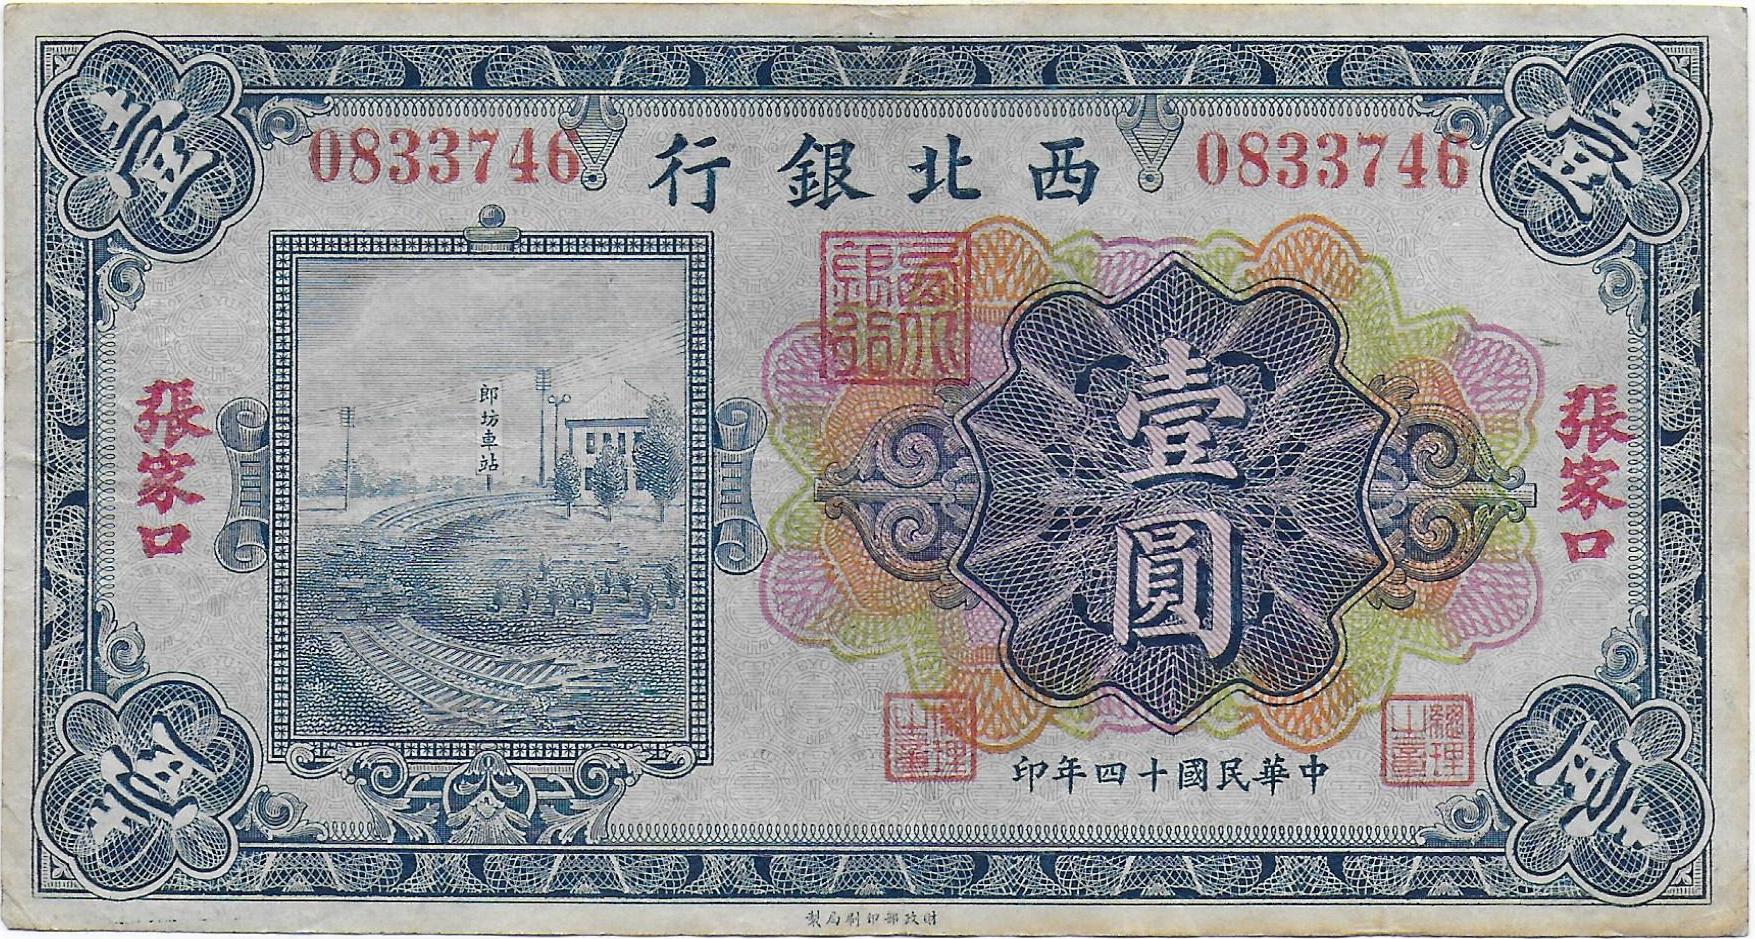 China Bank Of The Northwest One Yuan front.jpg